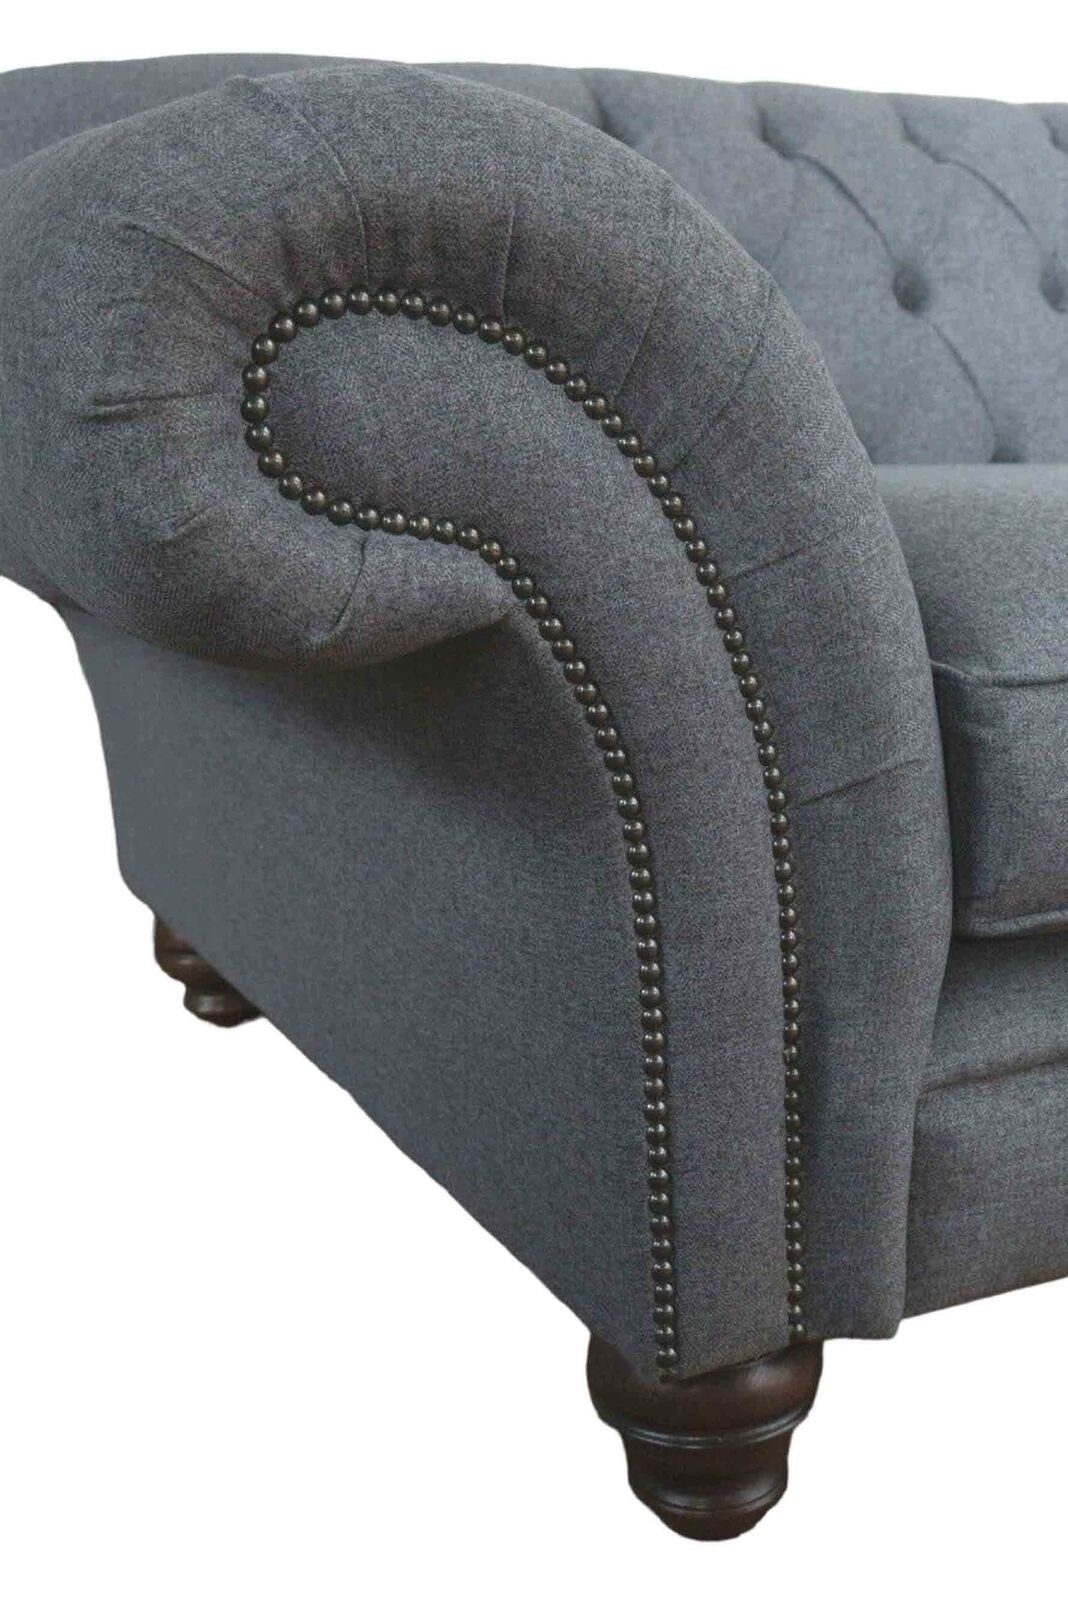 Textil Couch Europe Graues Sofa Made Sofa Chesterfield in JVmoebel 4 Polster Luxus Grau, Sitzer